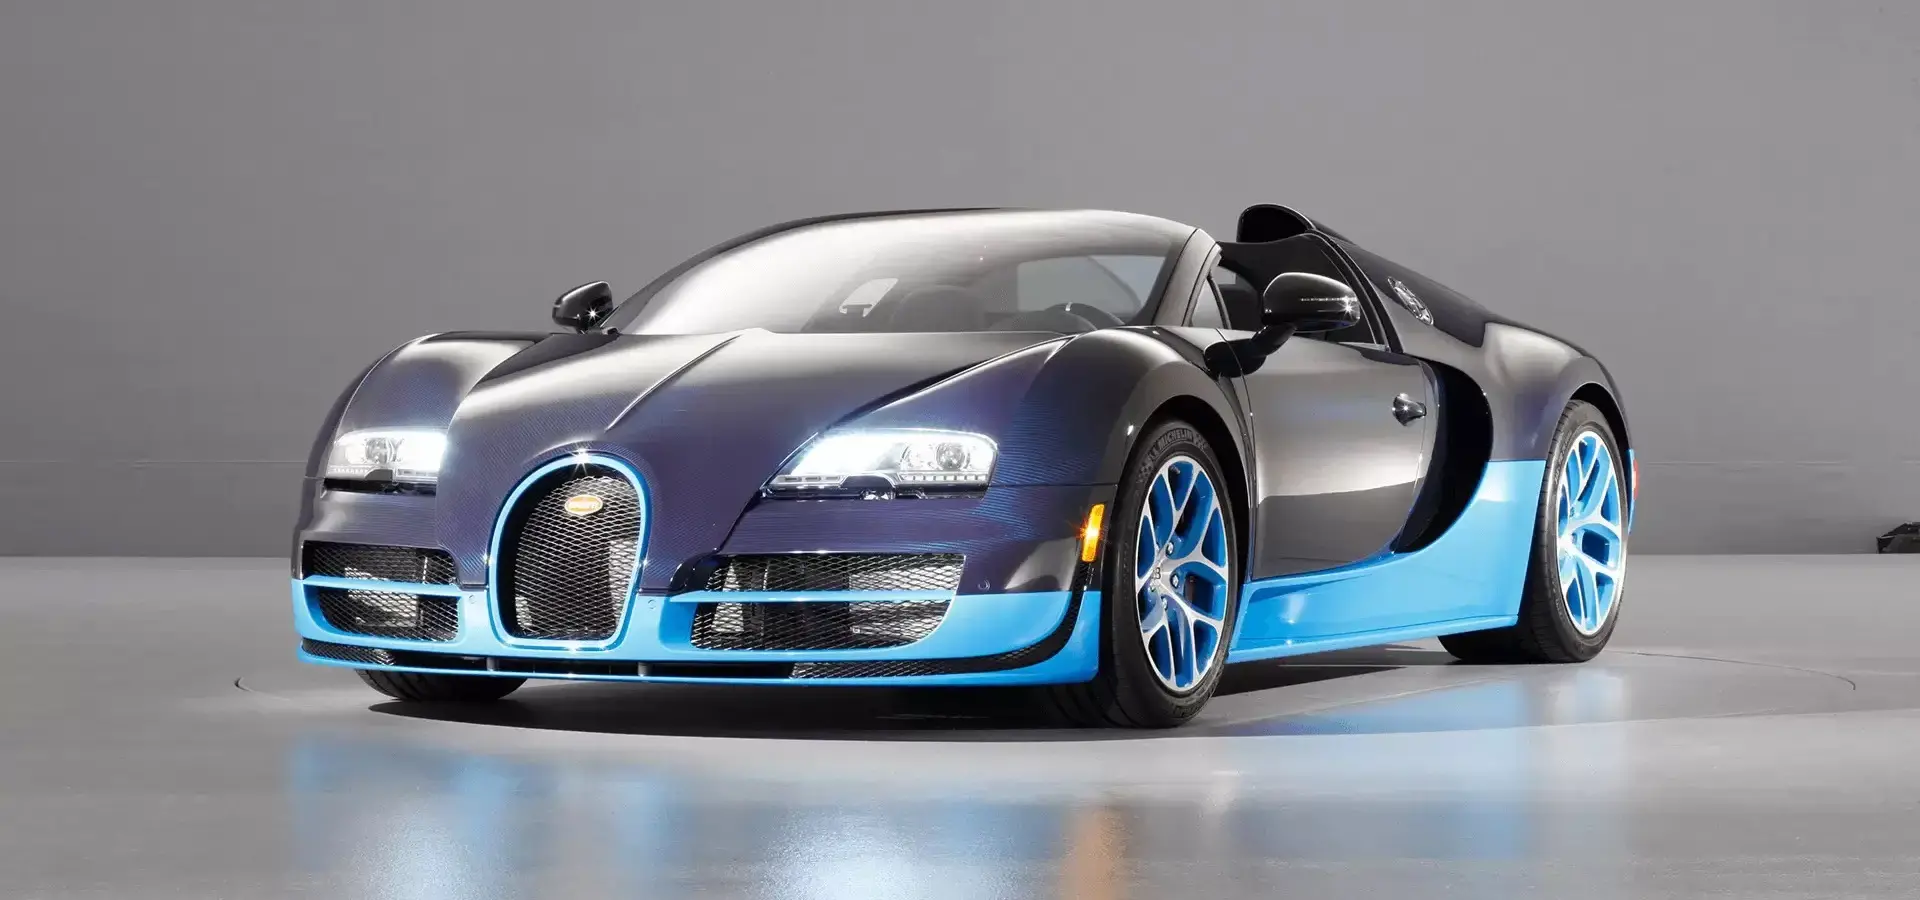 The Bugatti Veyron and the Quest for Speed